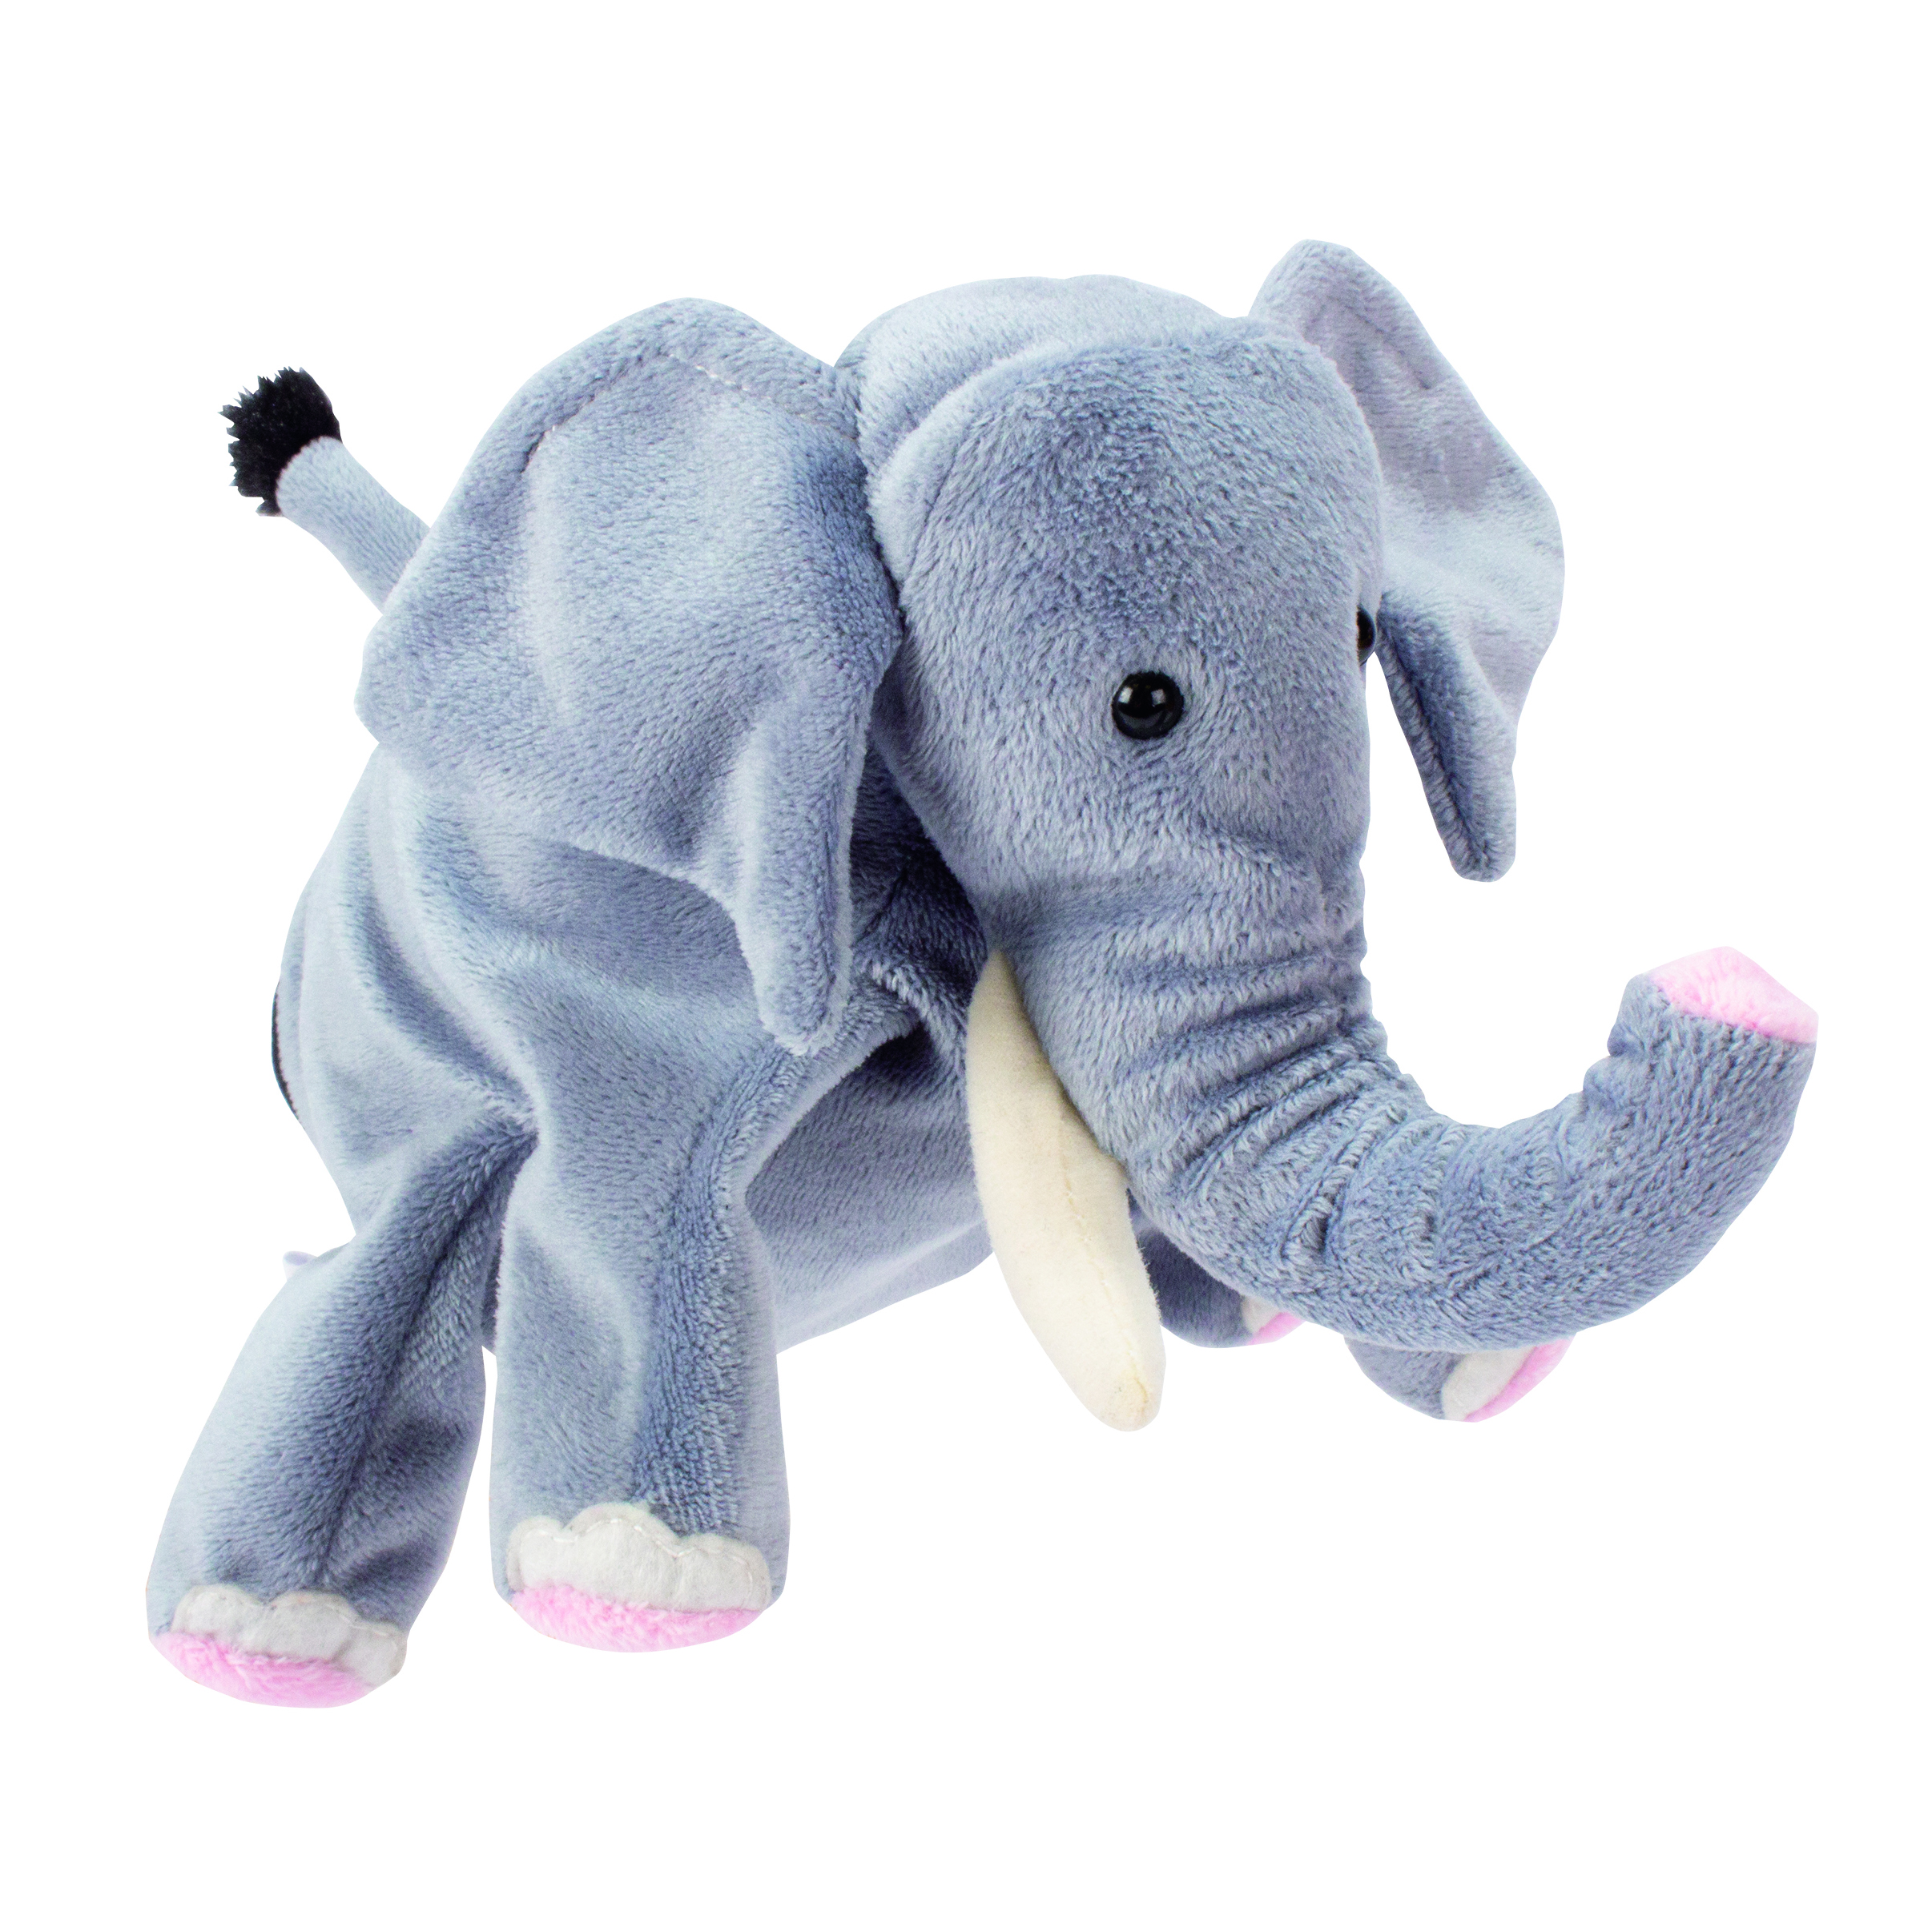 Hand puppet elephant - by Beleduc